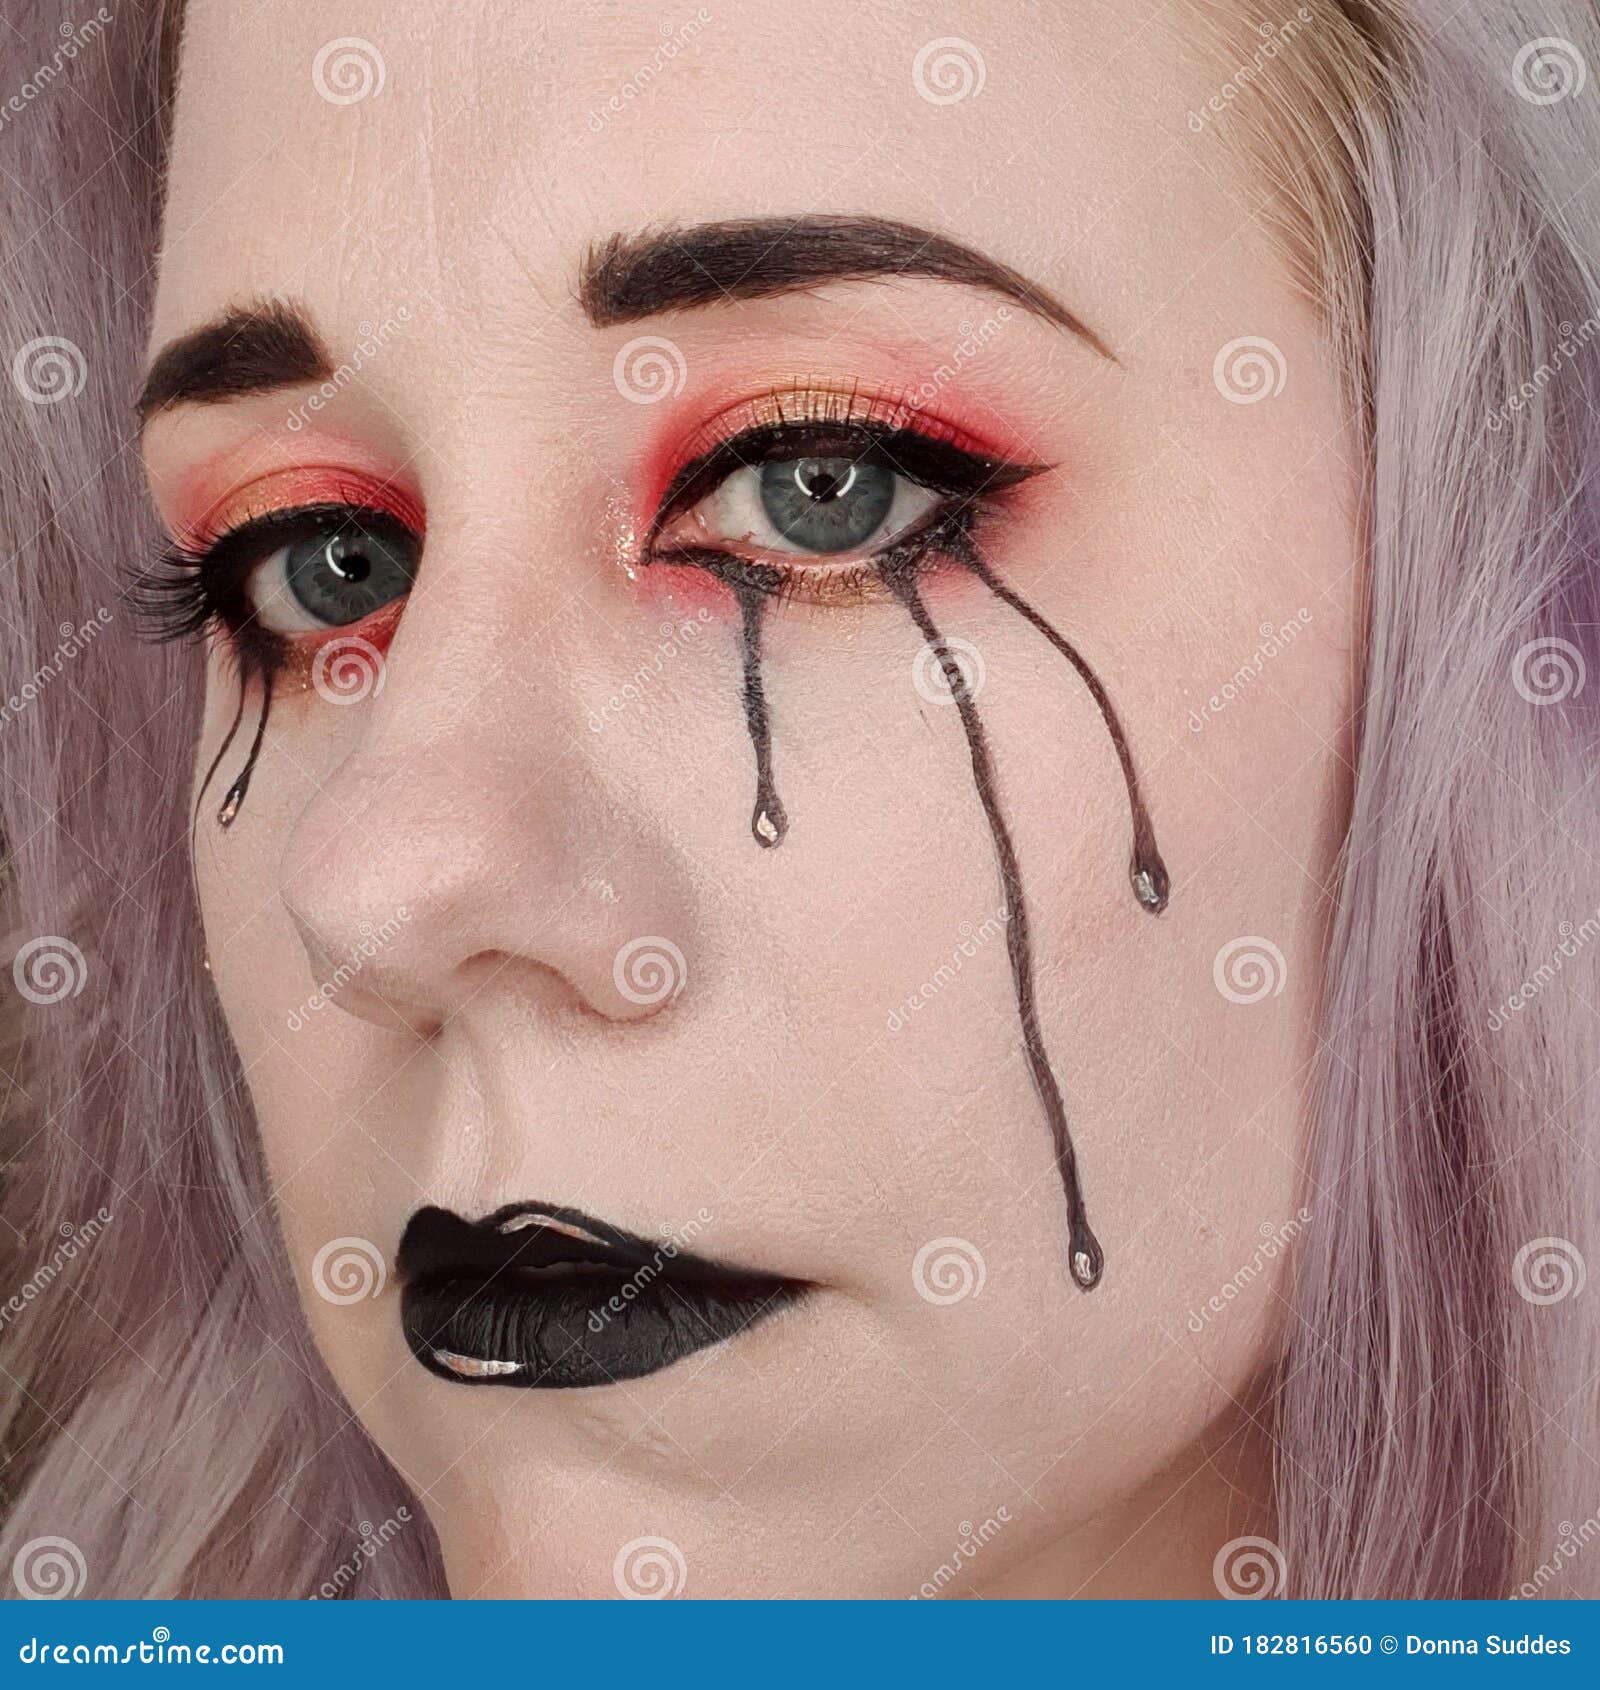 Gothic Black Makeup Look Stock Photo Image of mouth, color: 182816560